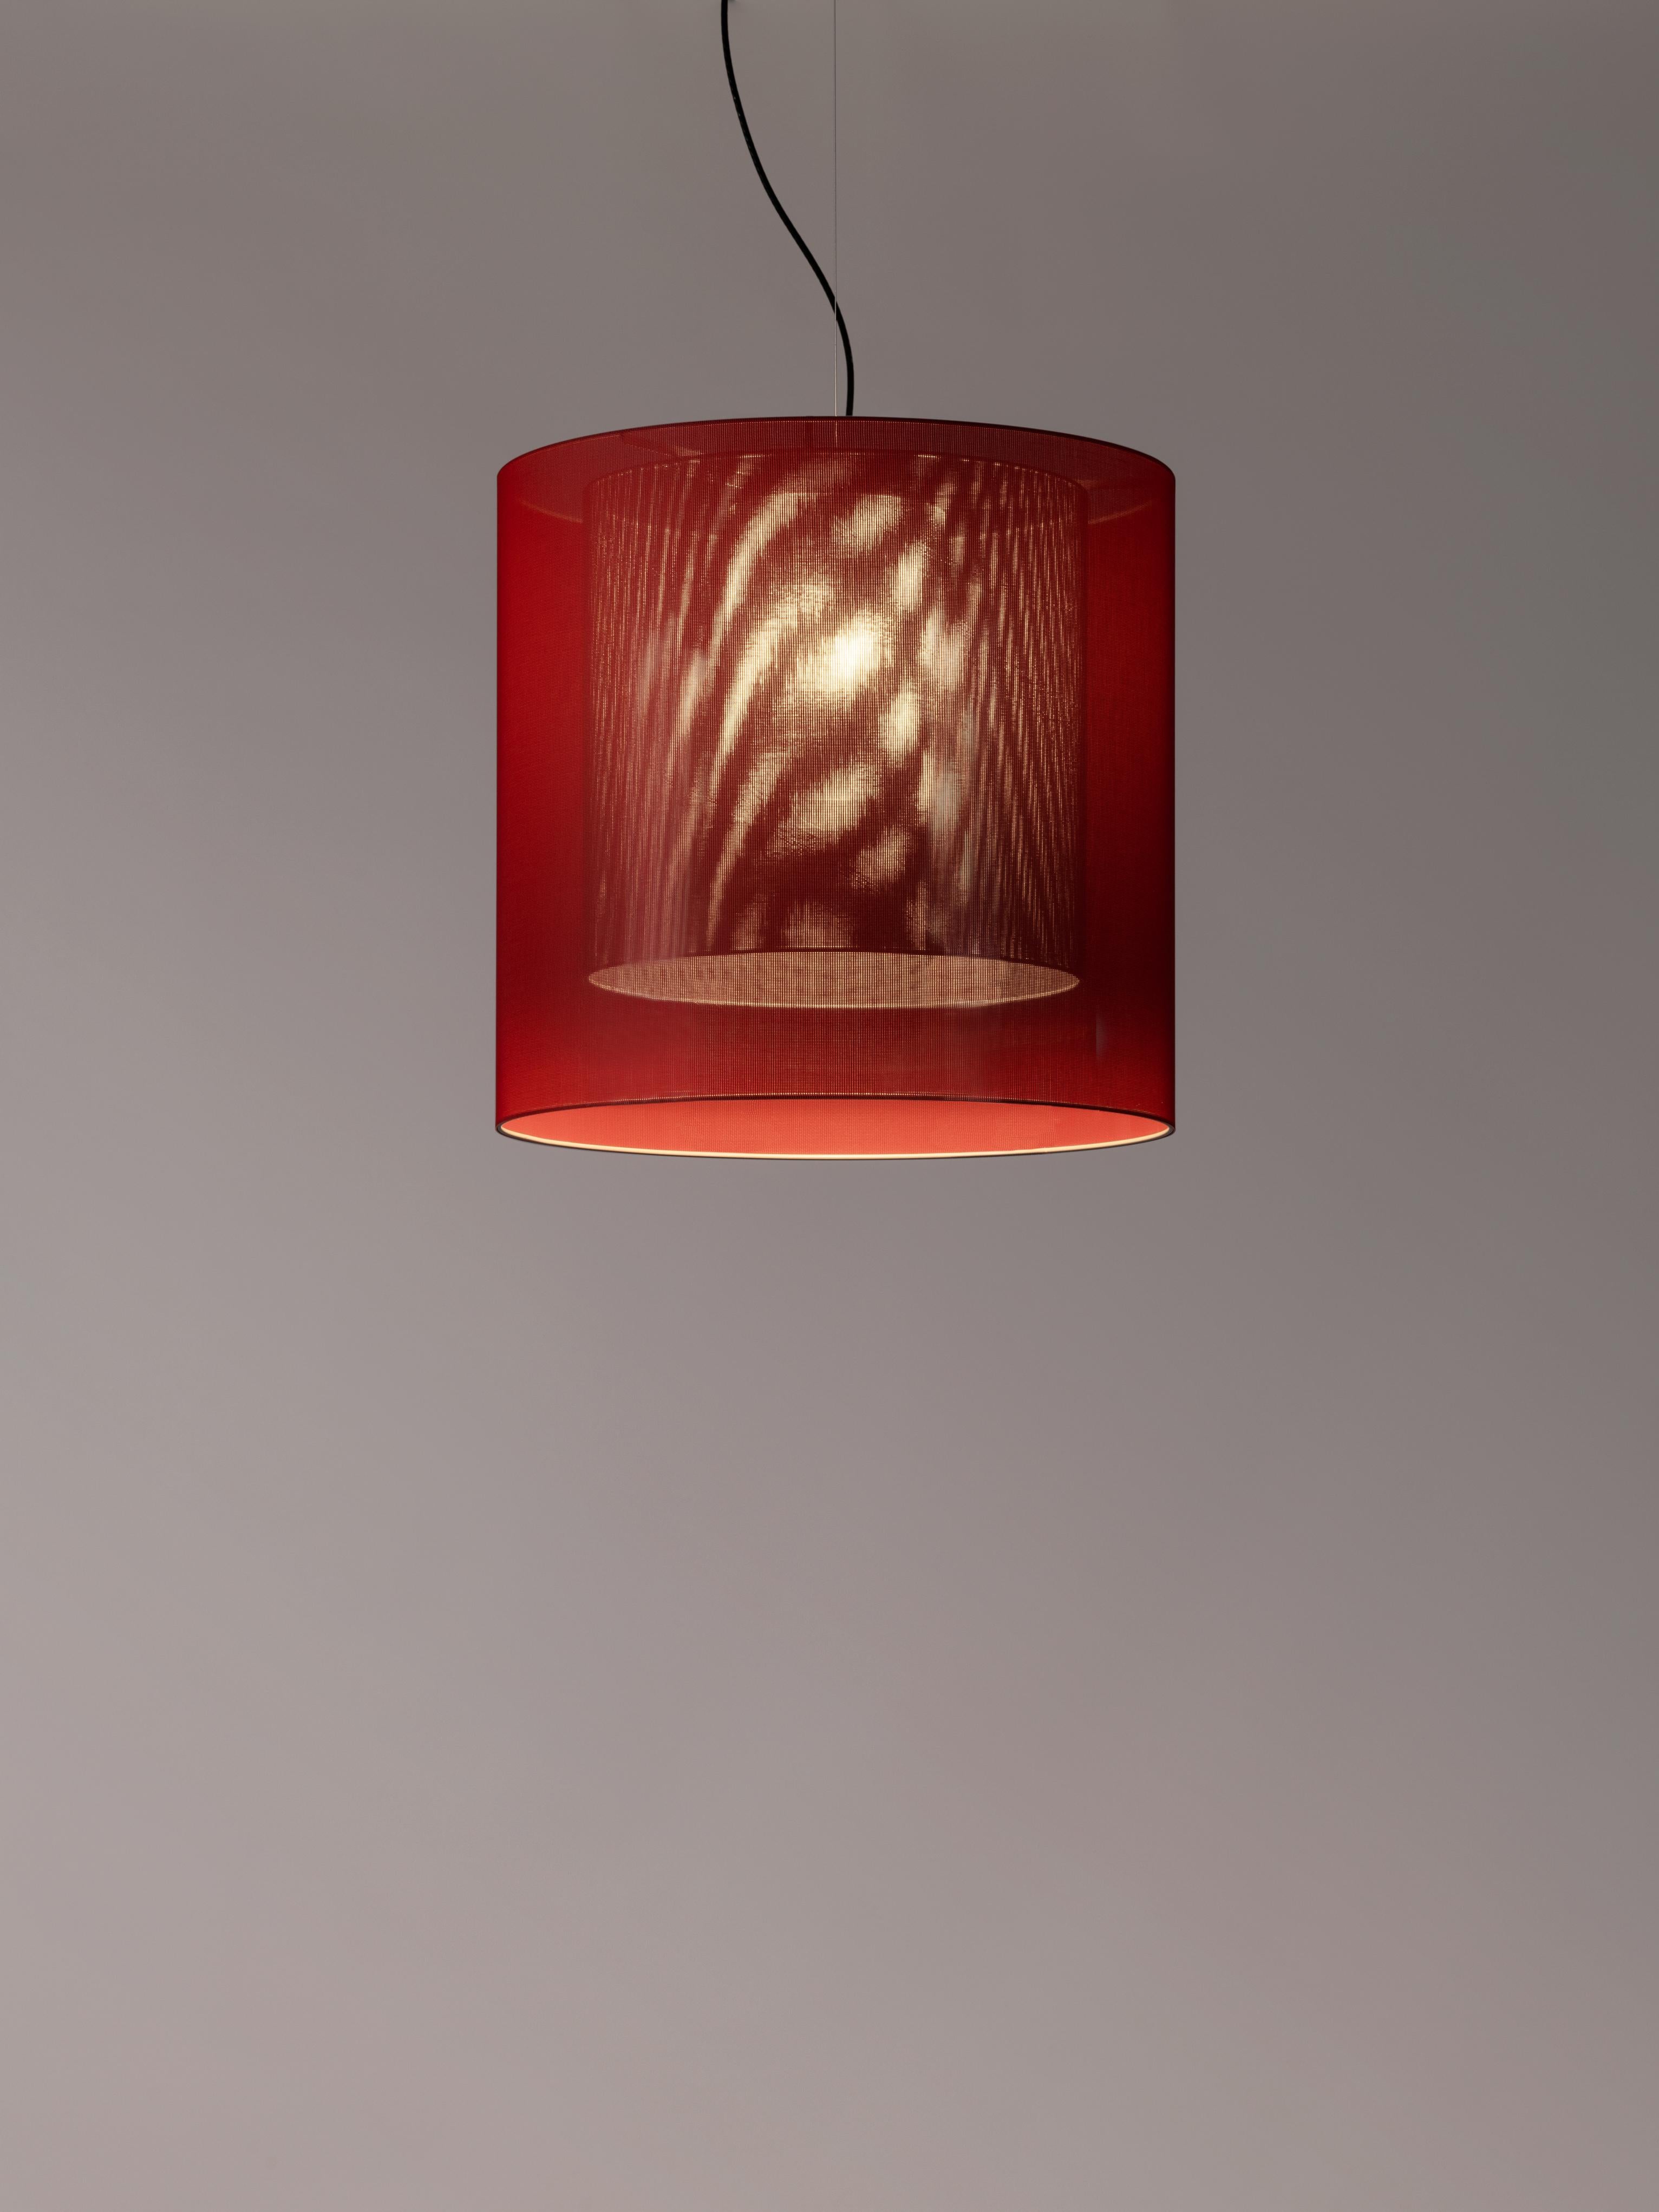 Red and grey moaré lm pendant lamp by Antoni Arola
Dimensions: d 62 x h 60 cm
Materials: Metal, polyester.
Available in other colors and sizes.

Moaré’s multiple combinations of formats and colors make it highly versatile. The series takes its